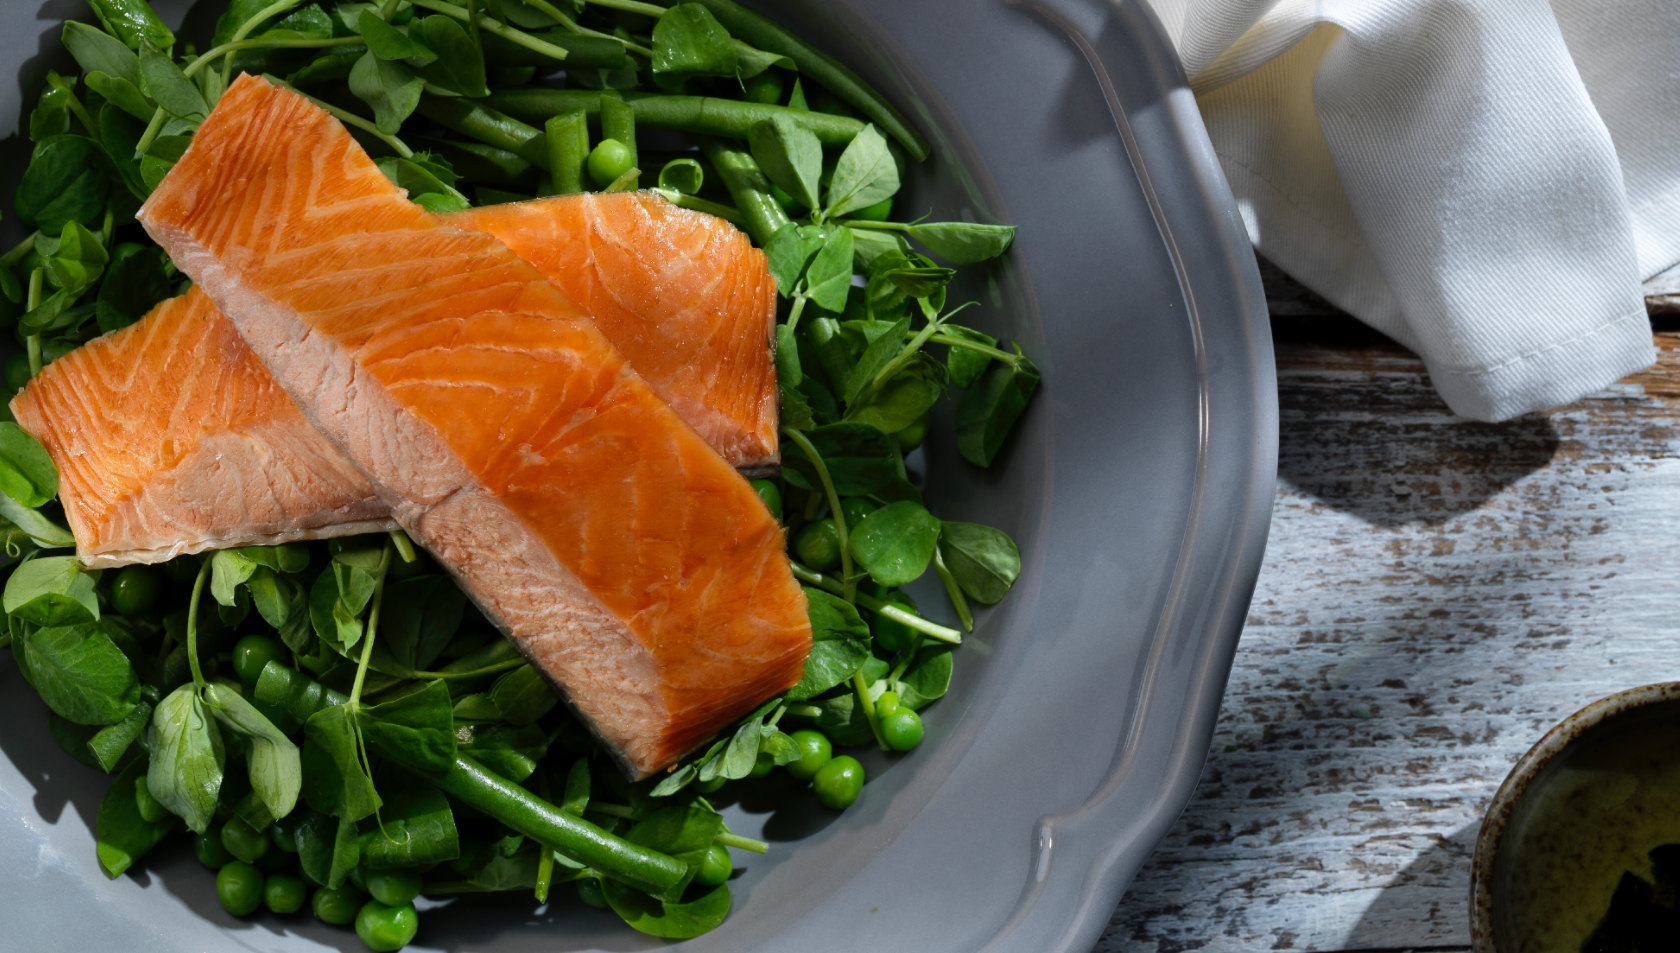 Two fillets of salmon resting on a bed of greens, beautifully presented on a grey plate.